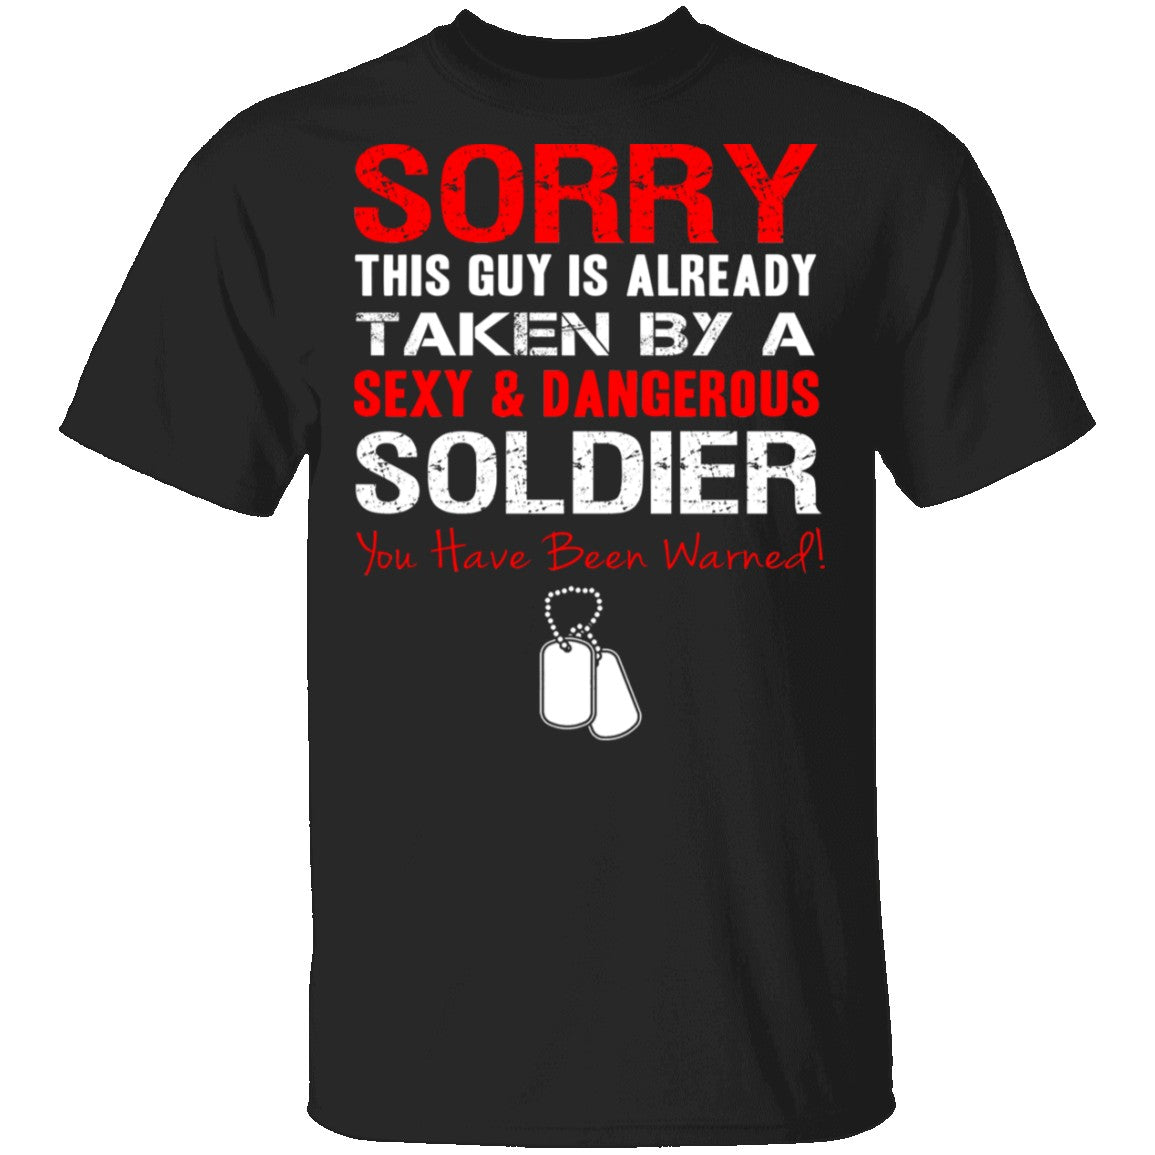 Sorry This Guy is Taken by a Soldier T-Shirt | Gnarly Tees